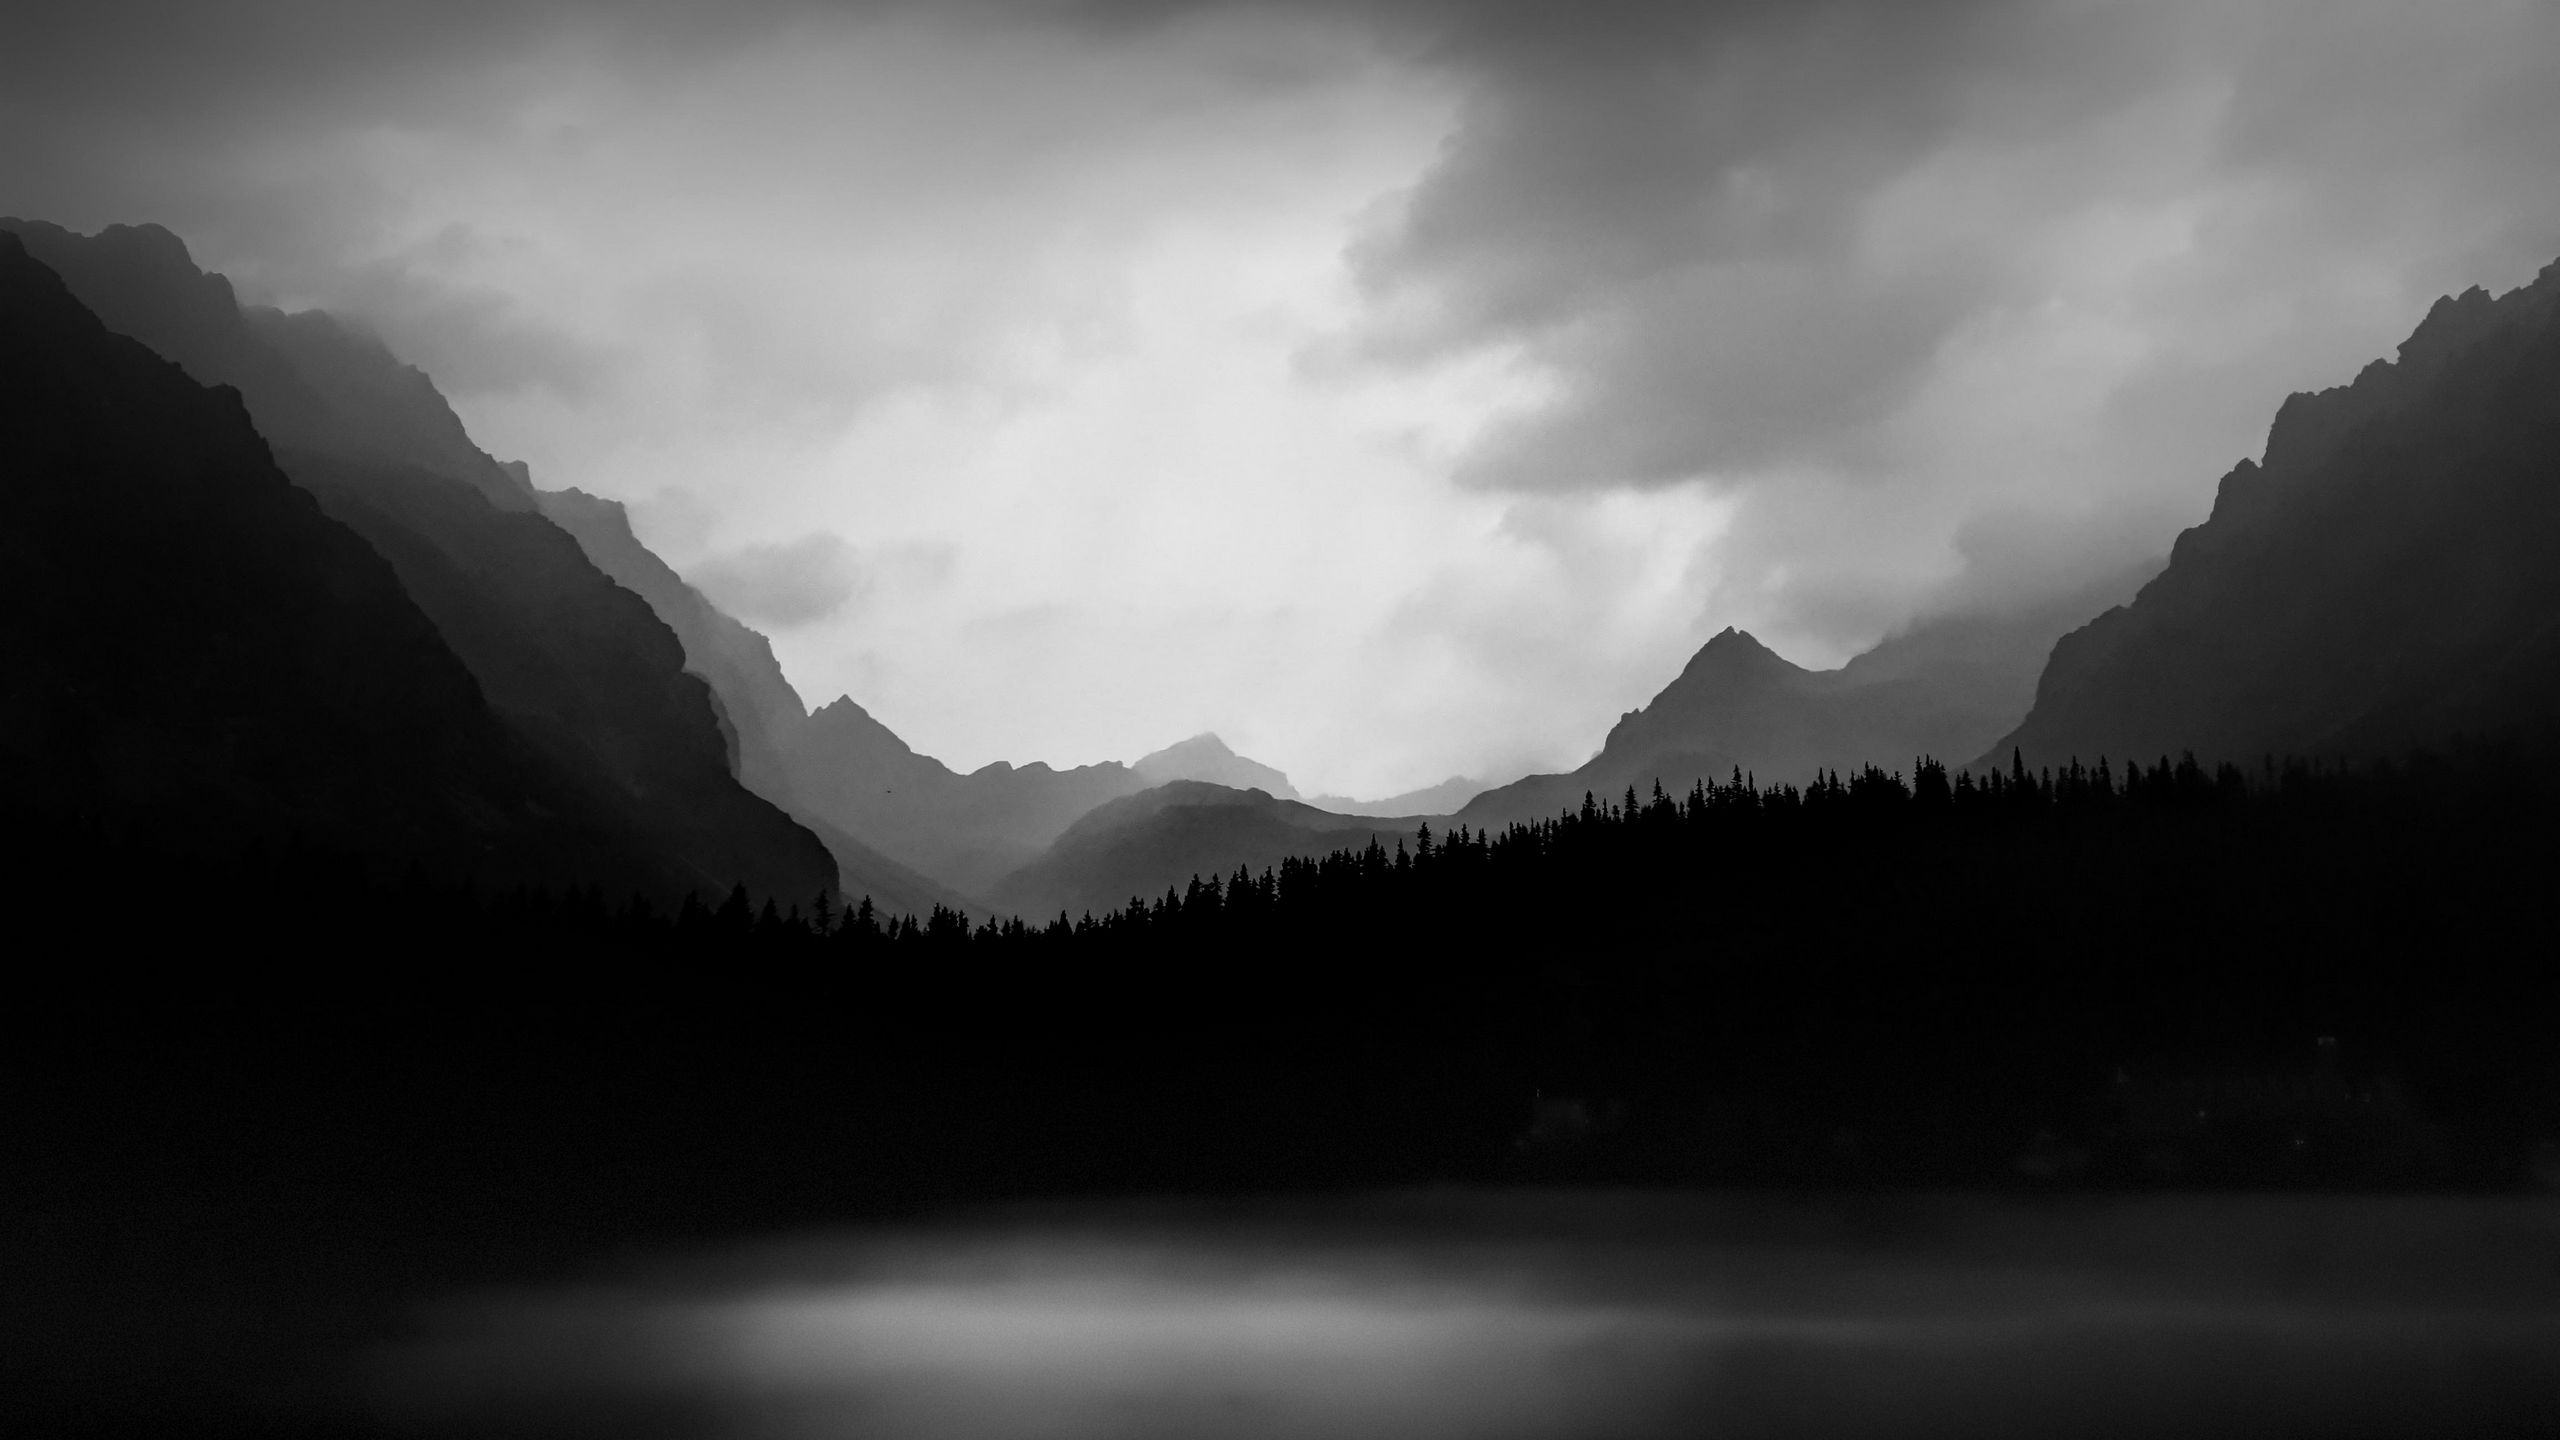 Download wallpaper 2560x1440 slope, relief, fog, bw widescreen 16:9 hd ...